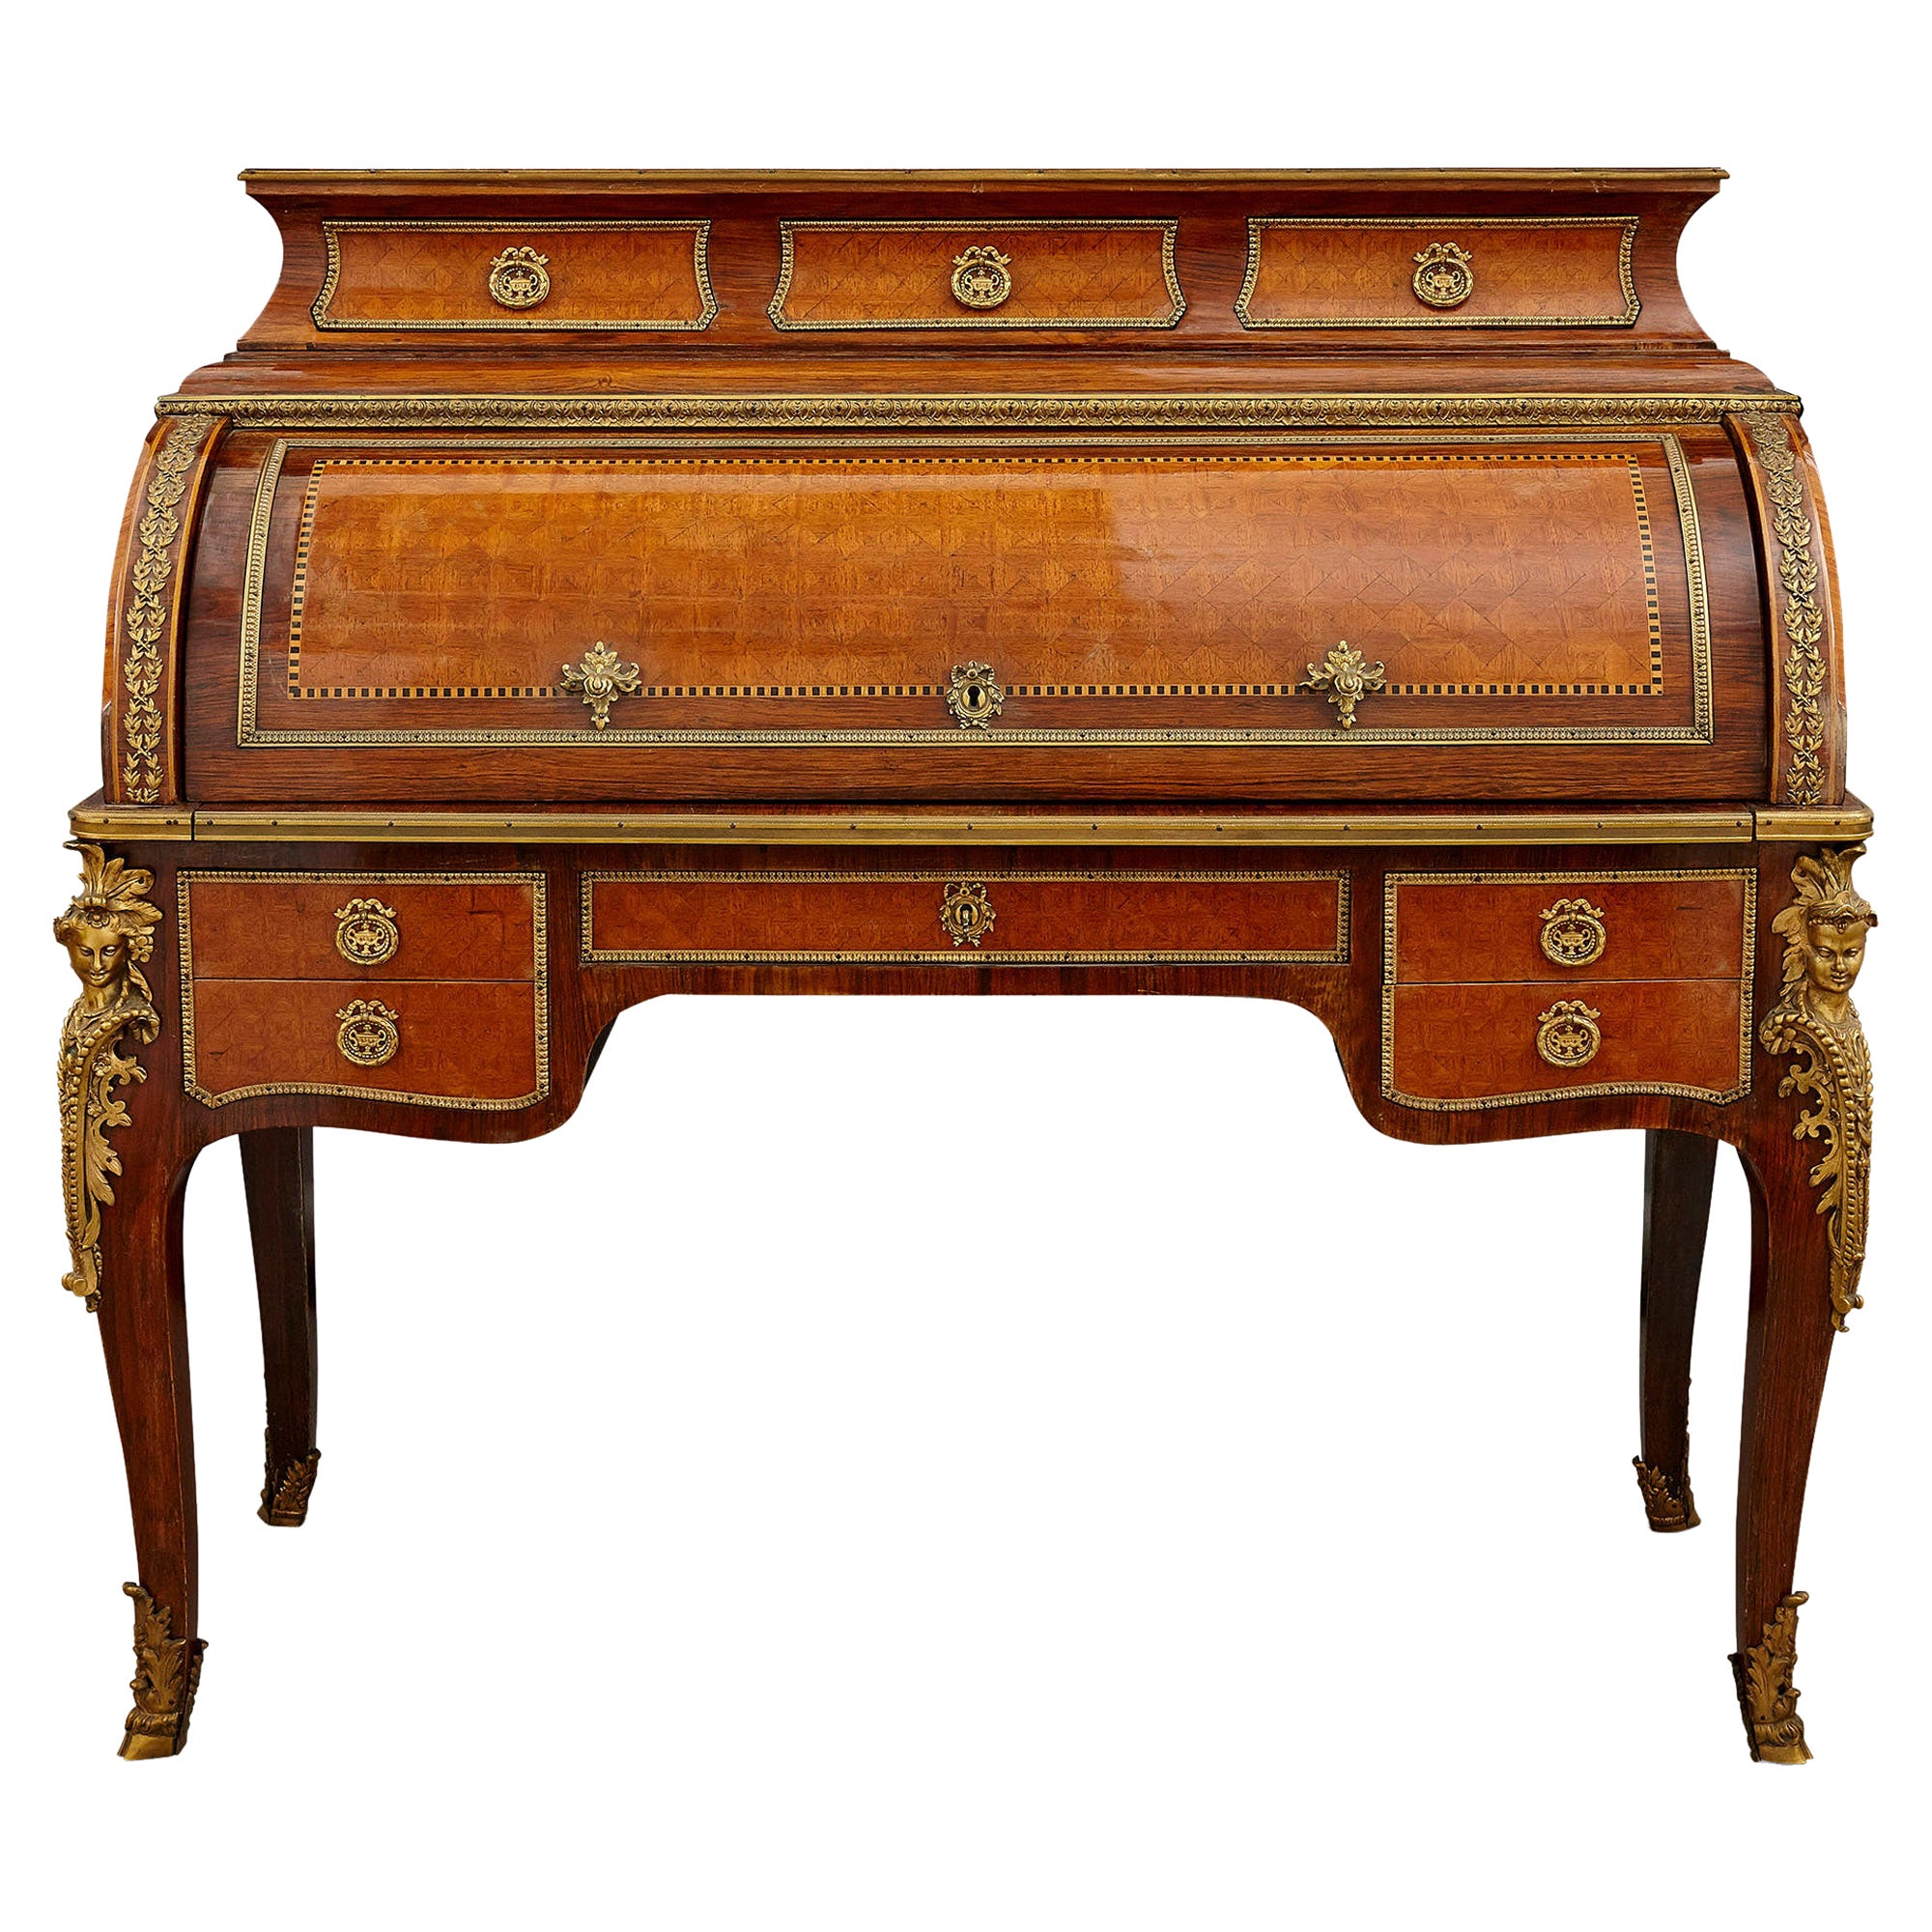 Transitional Style Gilt Bronze Mounted Roll Top Bureau For Sale